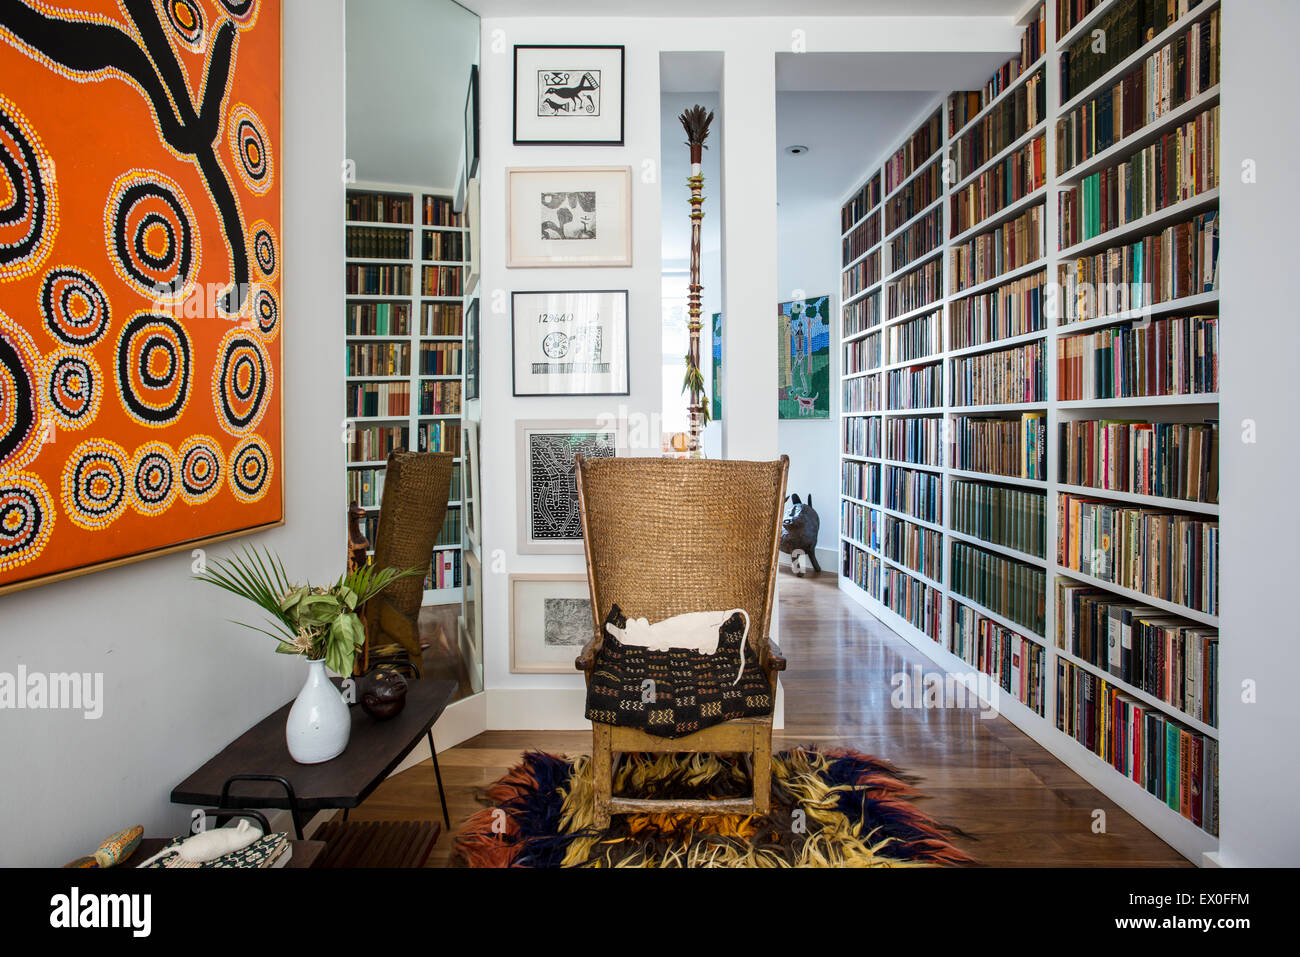 Antique Orkney chair in room with book shelving, shaggy rug and large aboriginal art piece Stock Photo